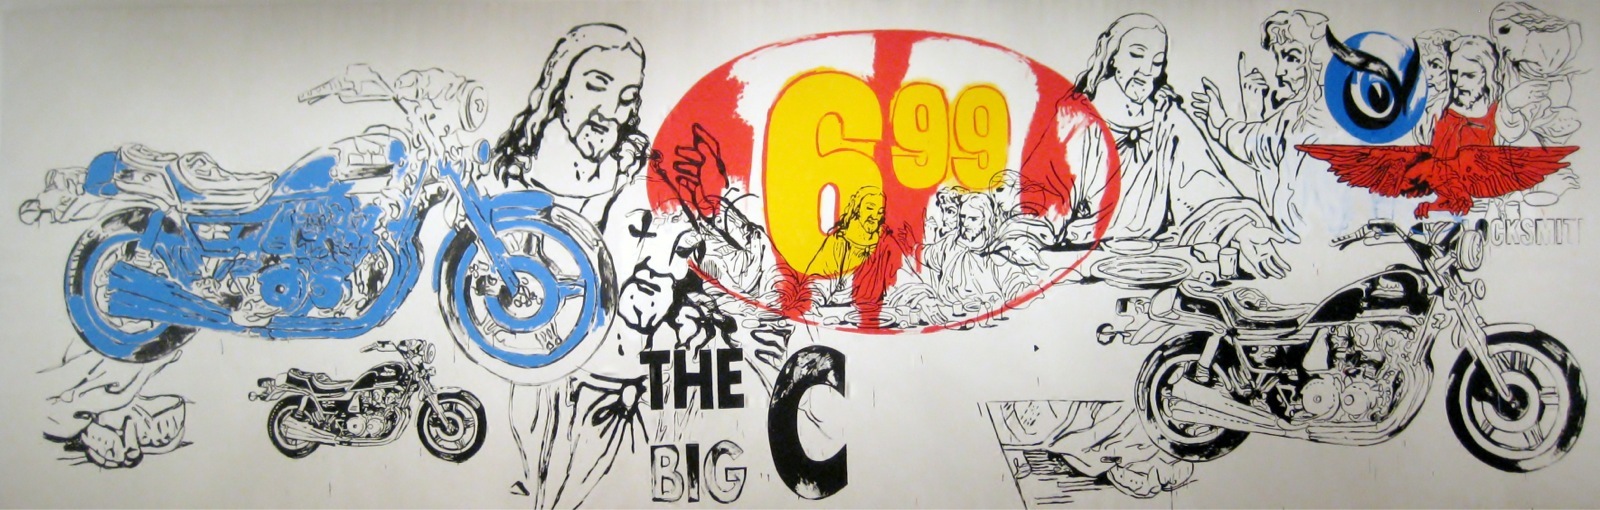 The Last Supper - The BIg C (1986) by Andy Warhol